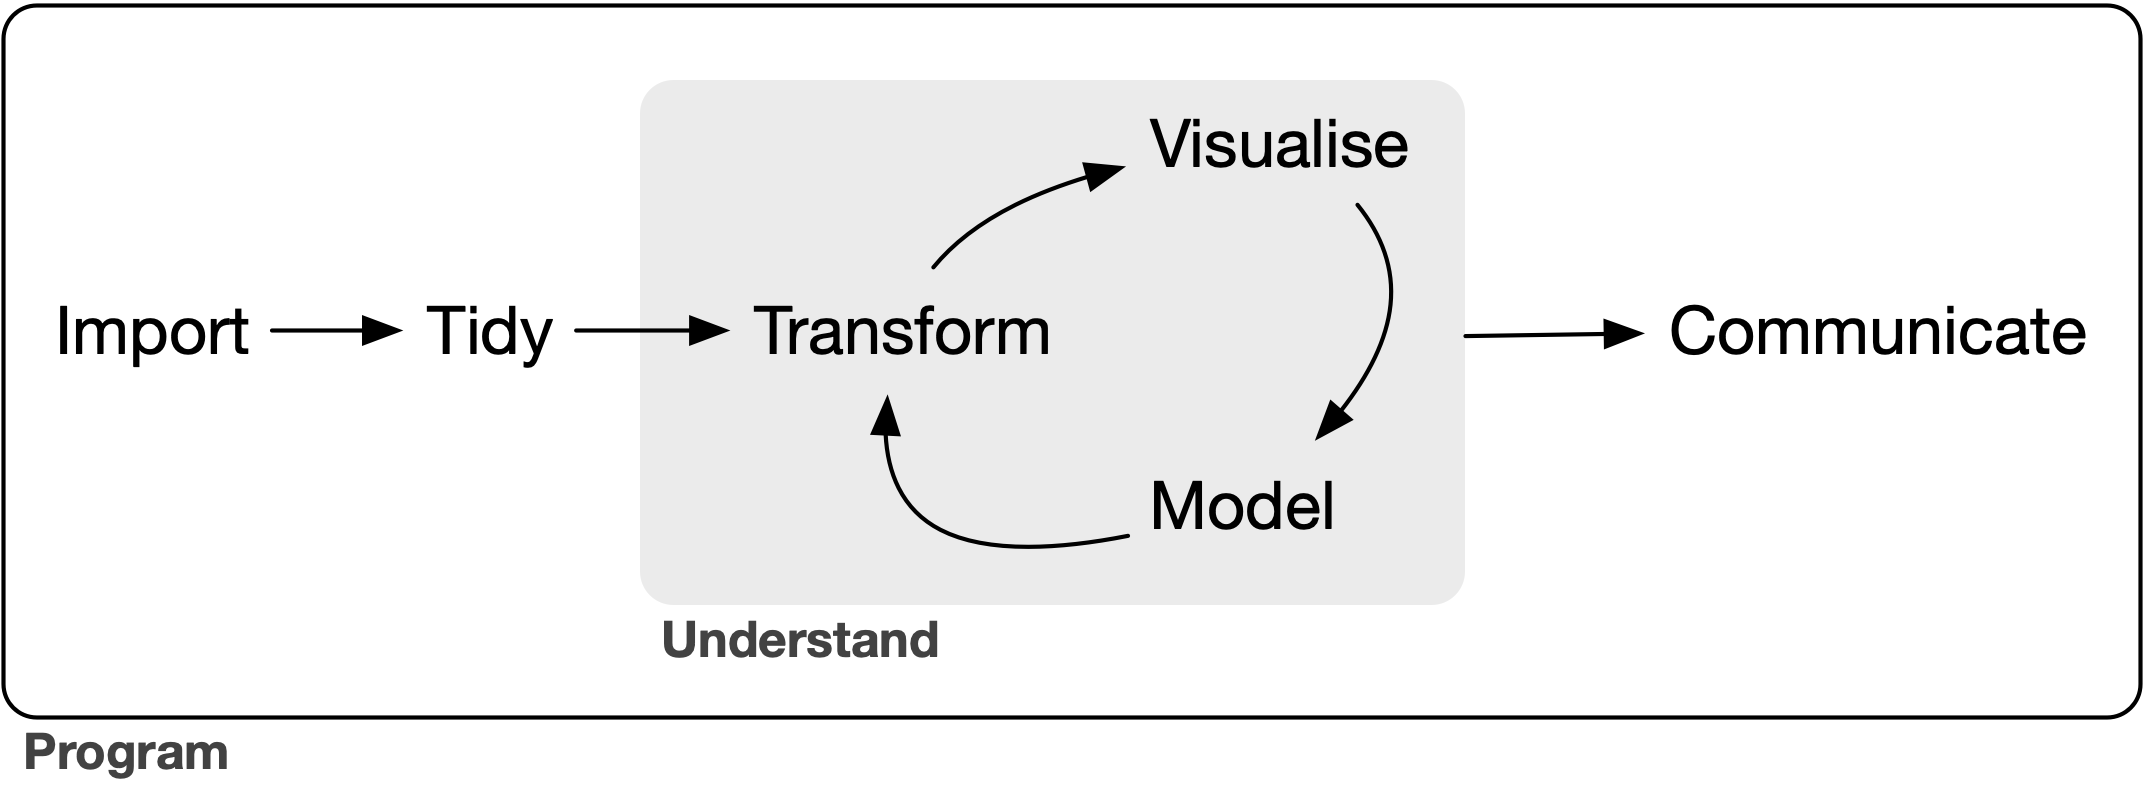 A diagram displaying the data science cycle: Import -> Tidy -> Understand
(which has the phases Transform -> Visualize -> Model in a cycle) ->
Communicate. Surrounding all of these is Communicate.
